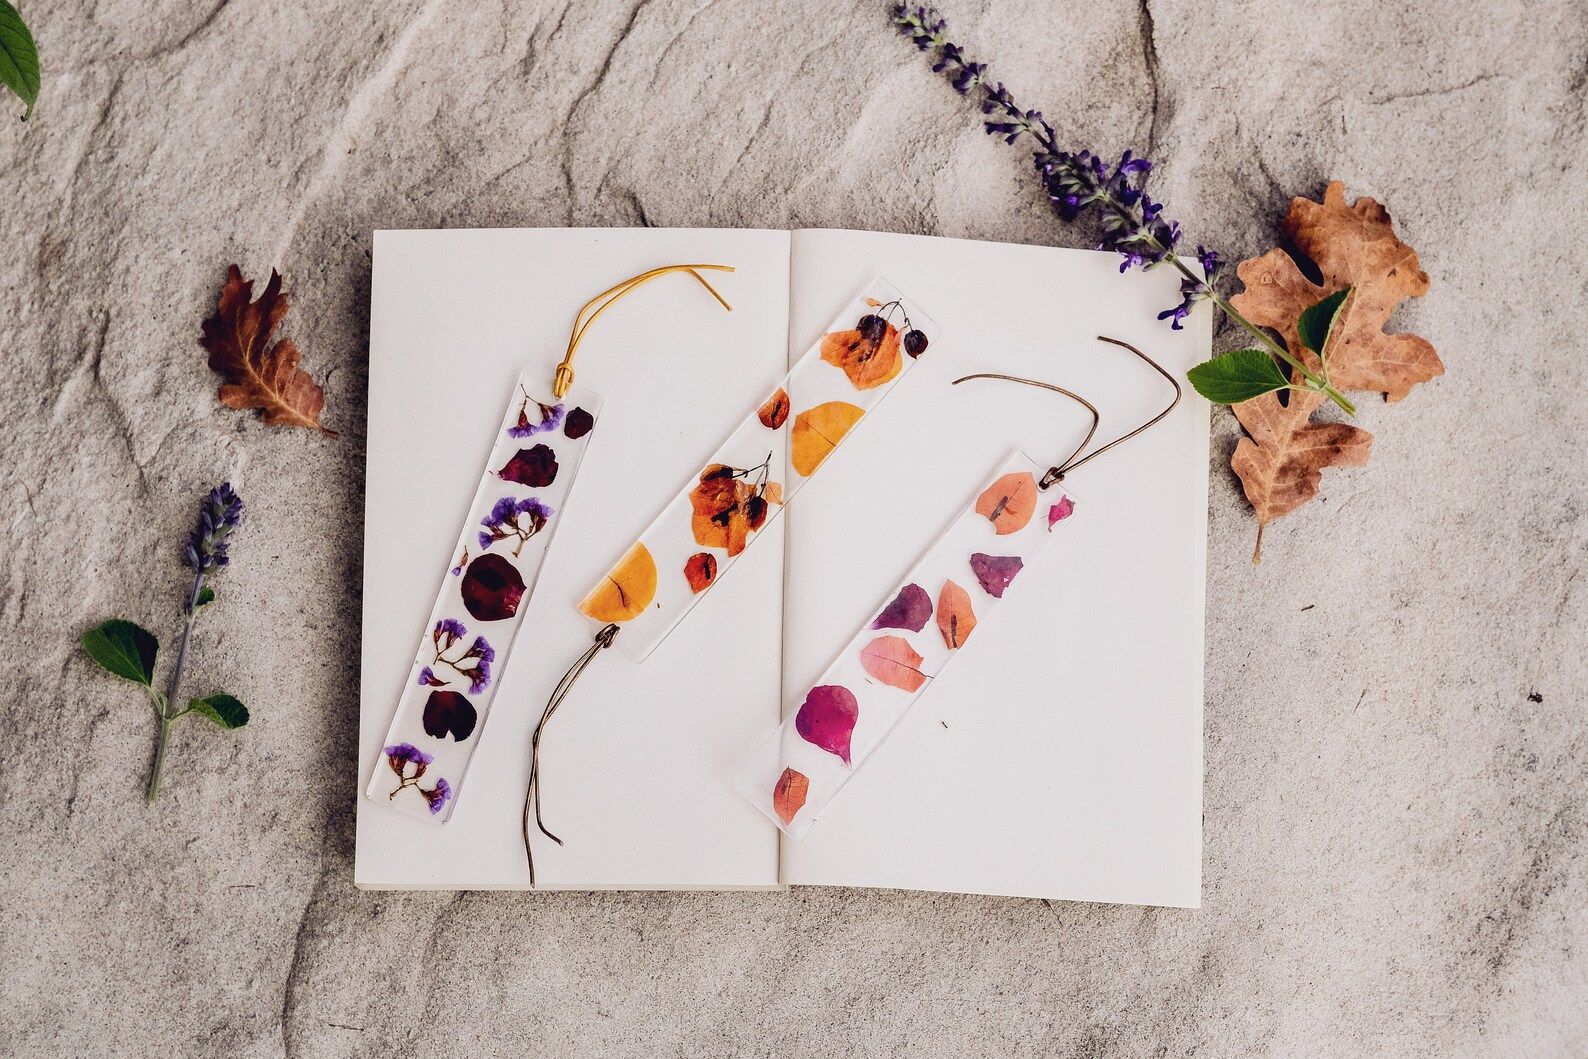 Image of three pressed flower bookmarks with tassels on an open blank book.